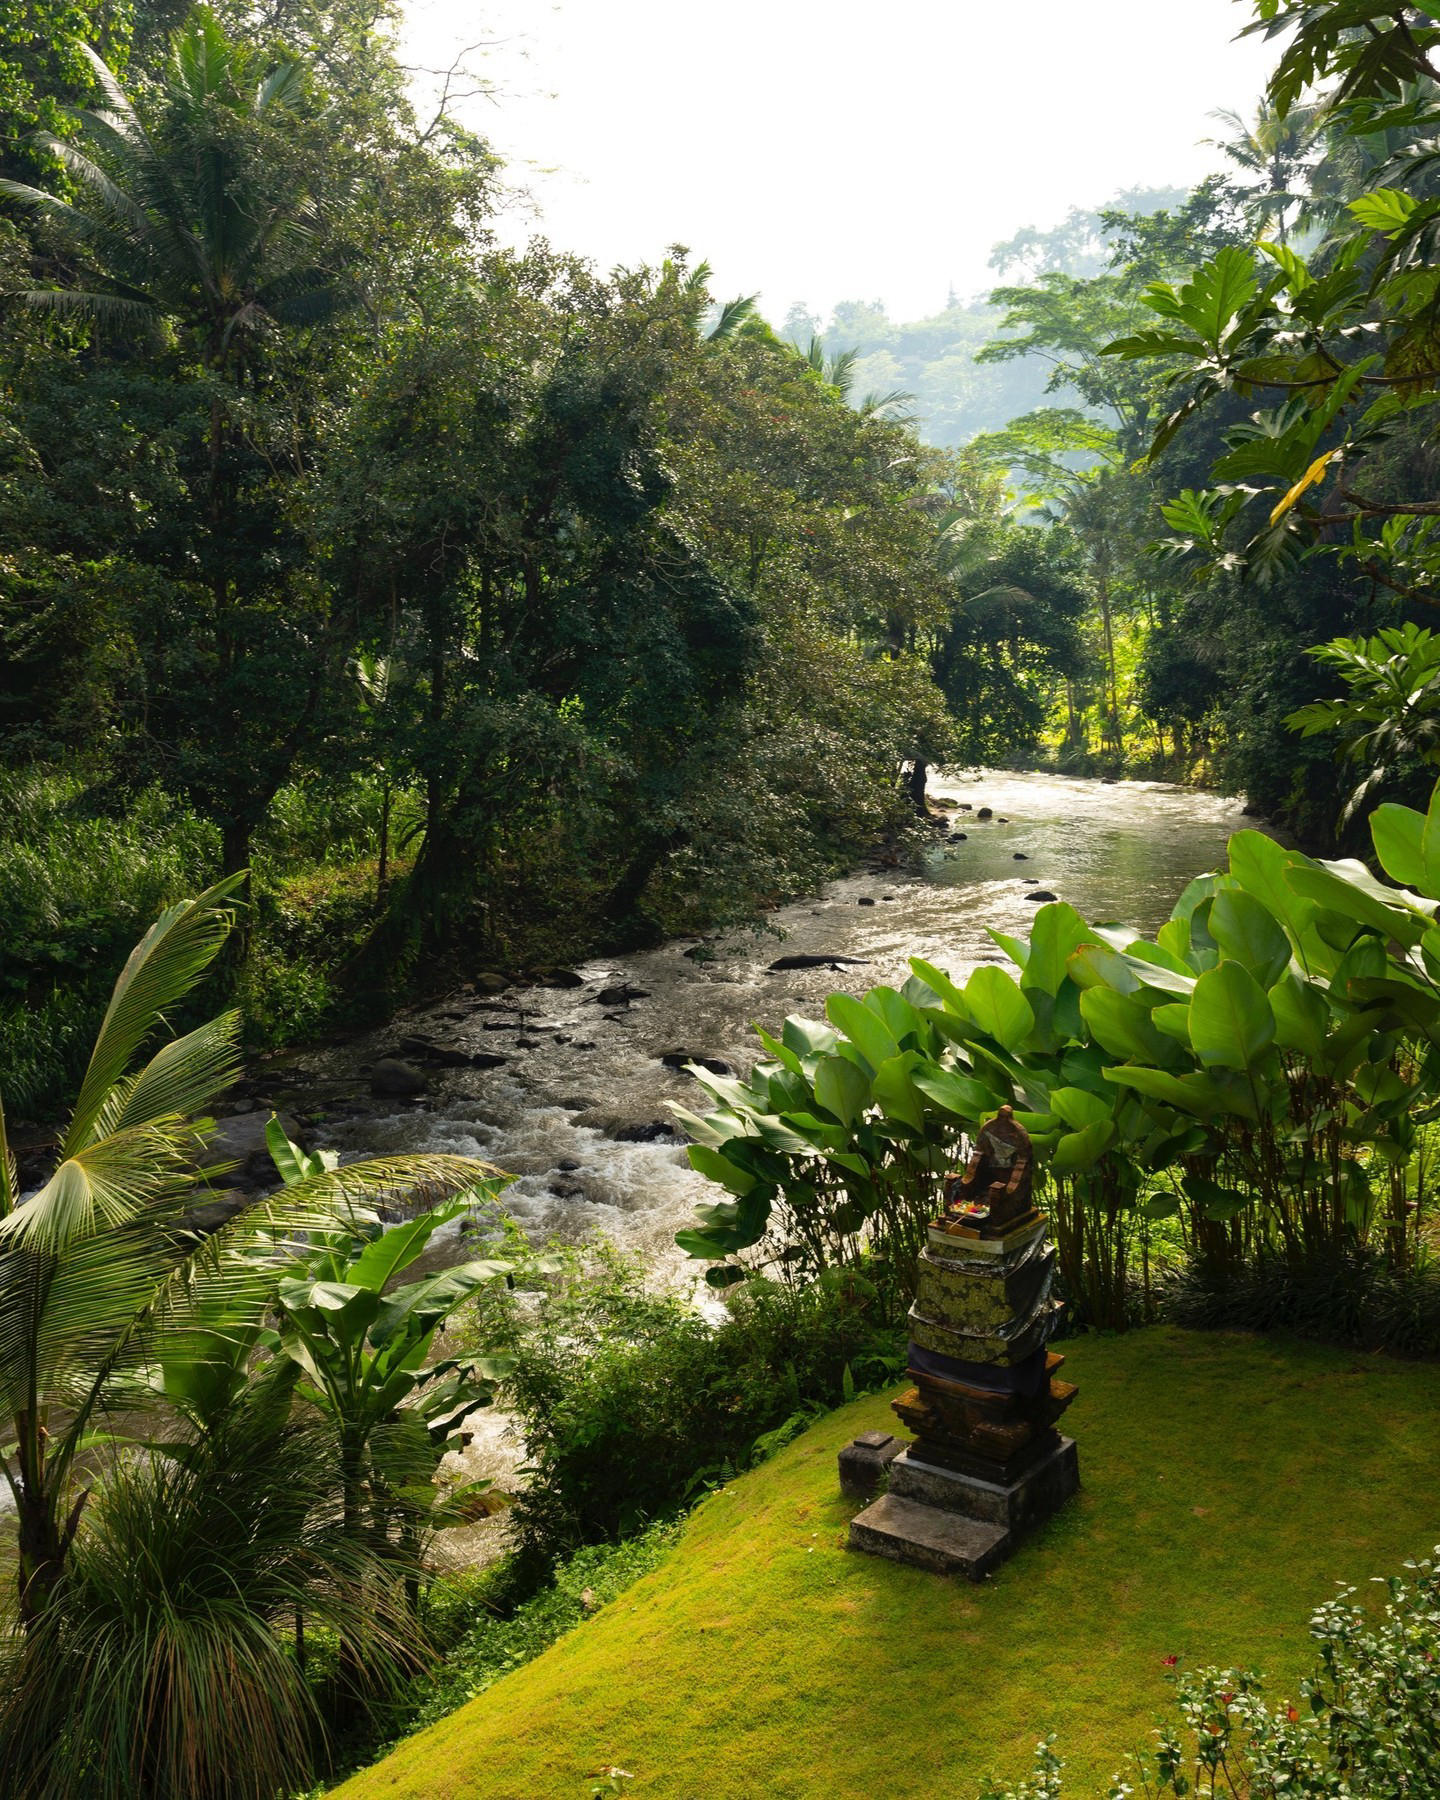 The Ayung River flows through the deepest of greens at #mandapareserve, defining each moment in our